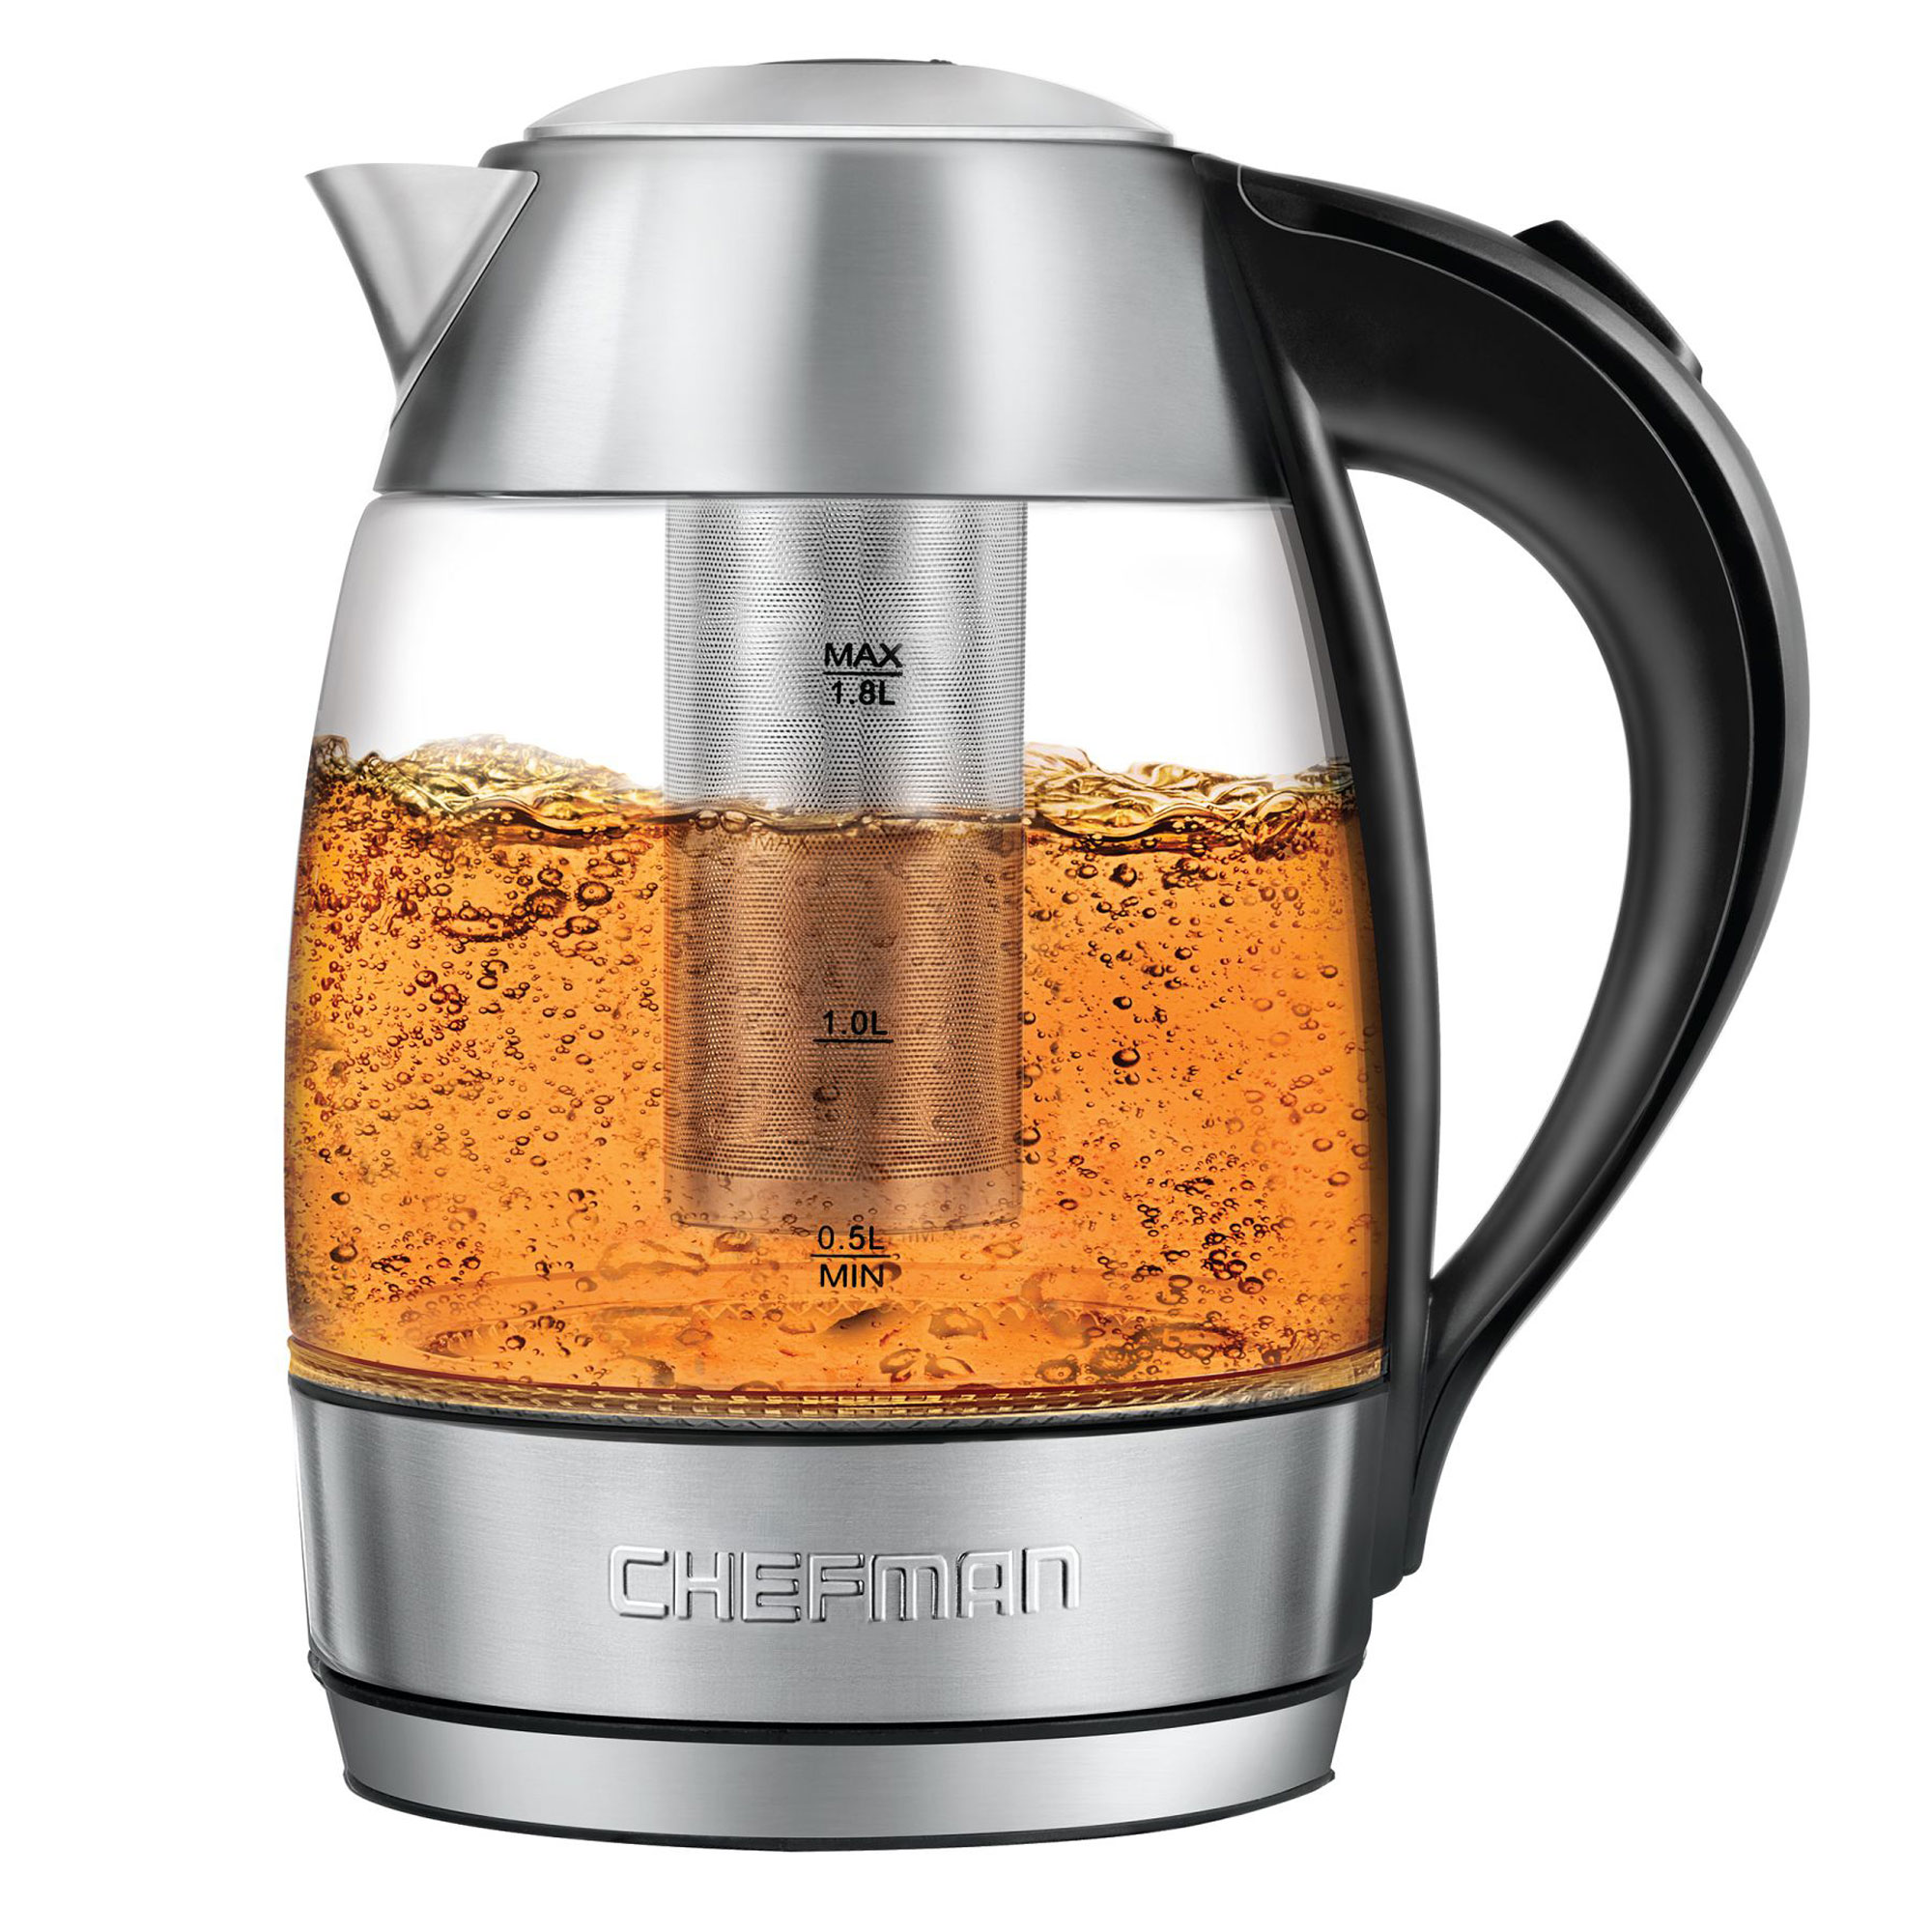 Chefman 1.8L Glass Electric Tea Kettle with Removable Tea Infuser